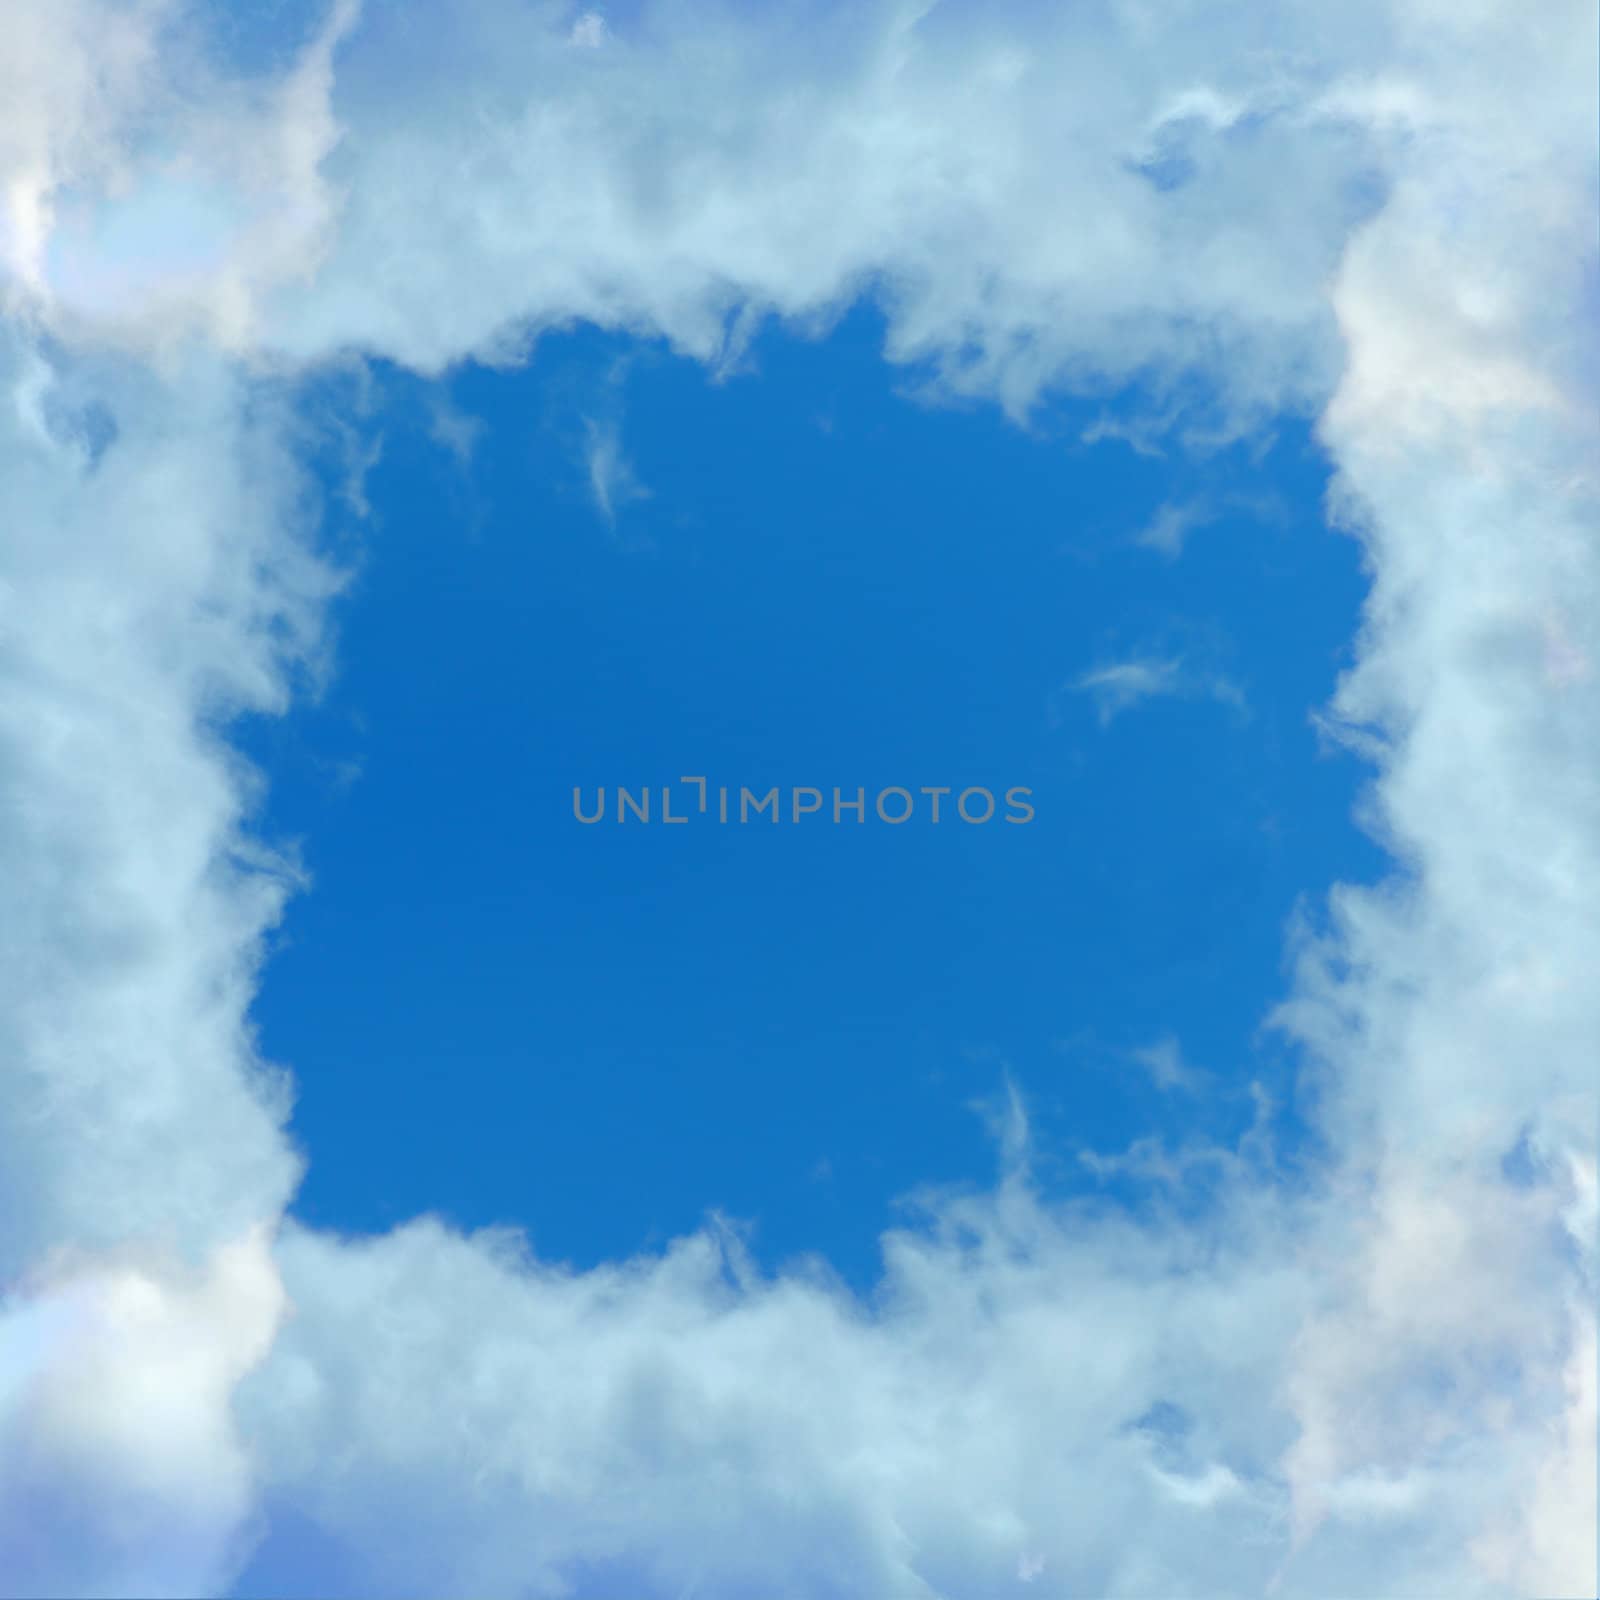 Clouds frame formation and blue sky abstract background. Design element.